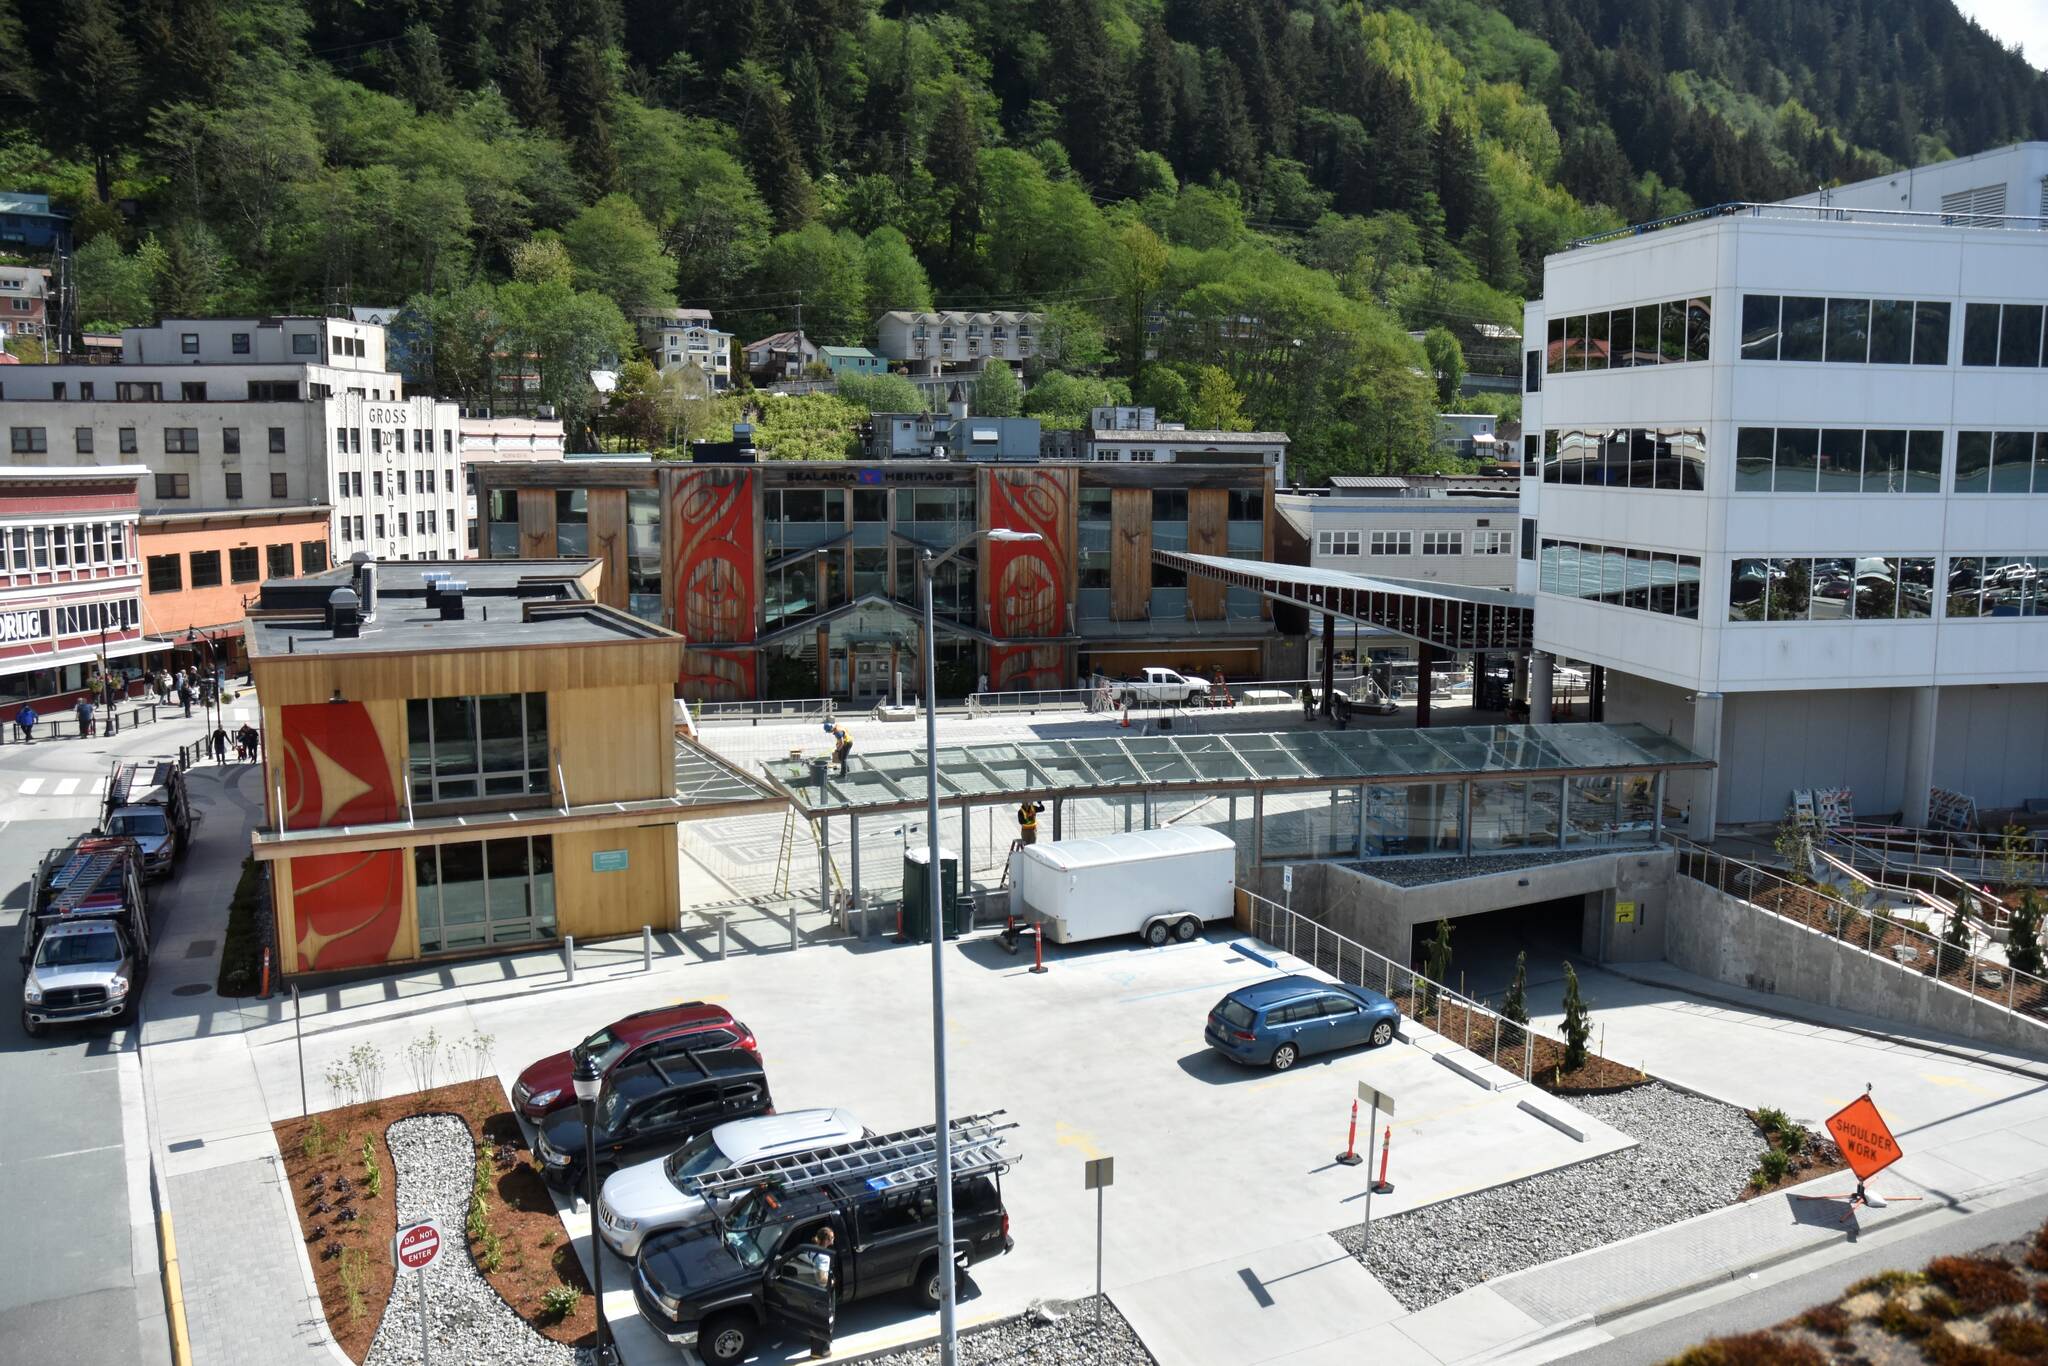 The Sealaska Heritage Institute’s new arts campus was still under construction on Wednesday, May 25, 2022, but will officially open at noon this Wednesday for the start of Celebration, Sealaska’s biennial festival. (Peter Segall / Juneau Empire)